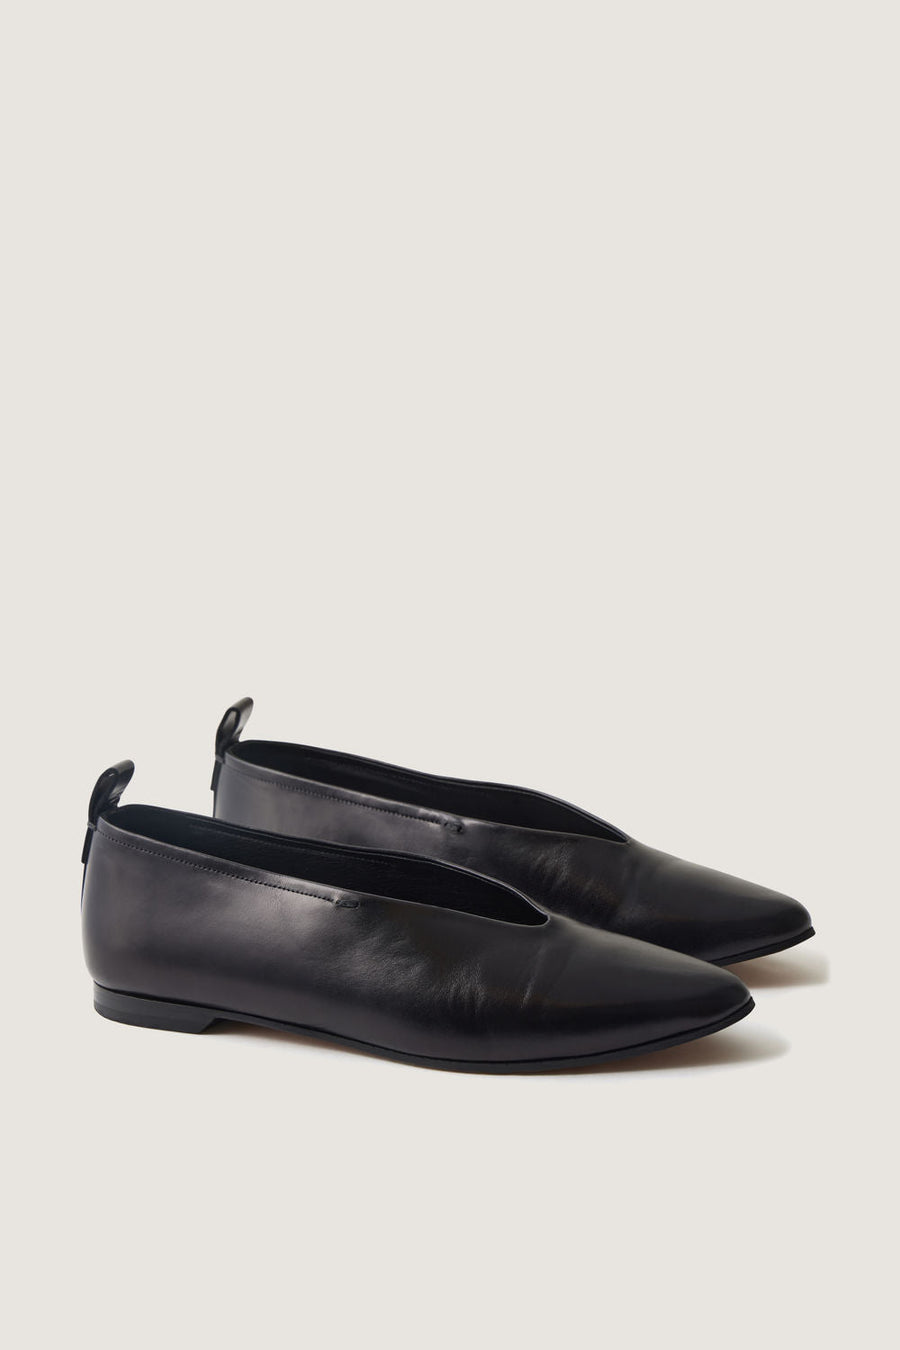 AVA LOAFERS